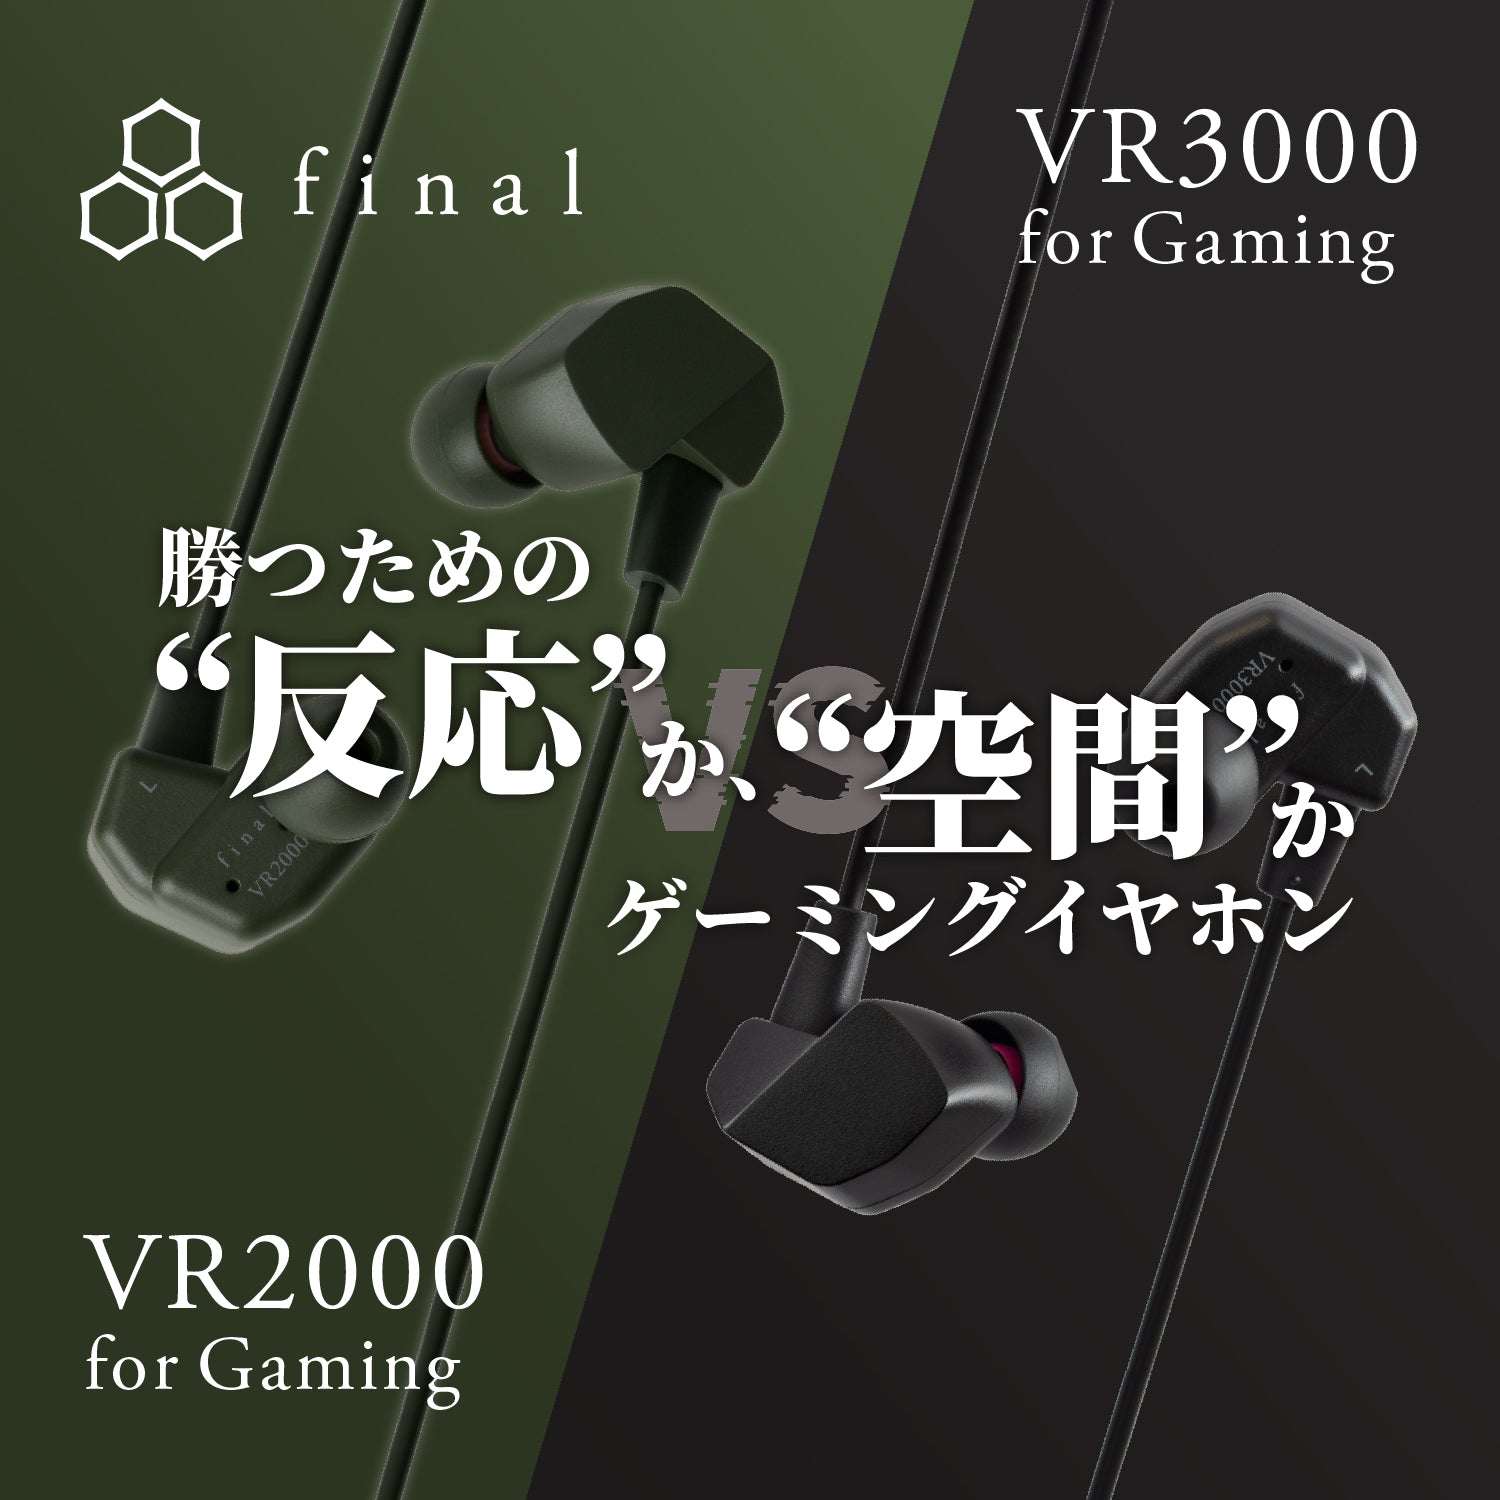 VR2000 for Gaming｜final 公式ストア